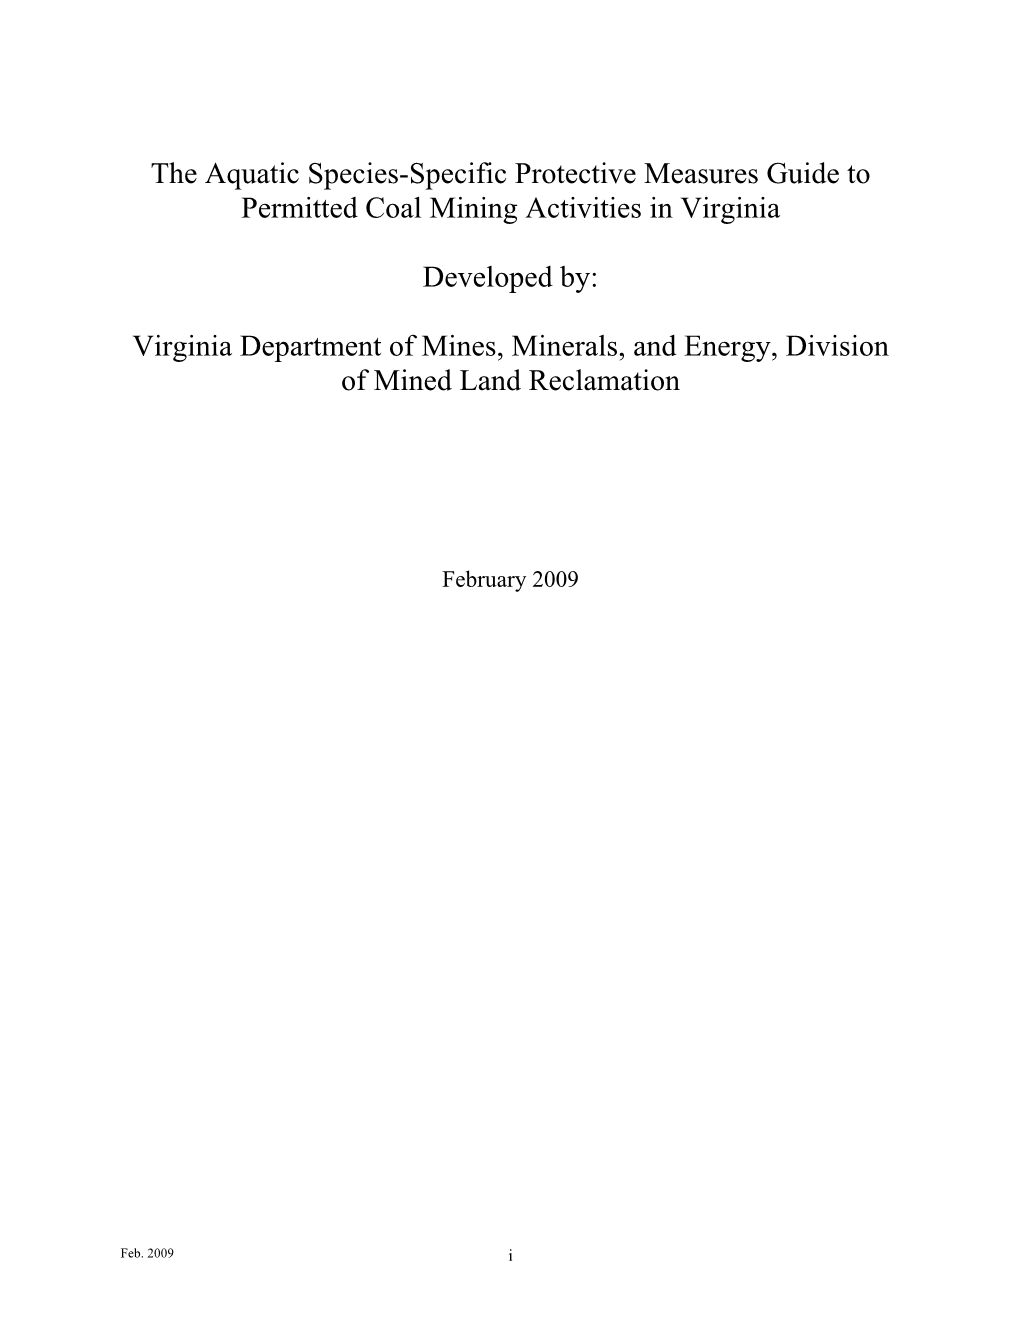 Aquatic Species-Specific Protective Measures Guide to Permitted Coal Mining Activities in Virginia